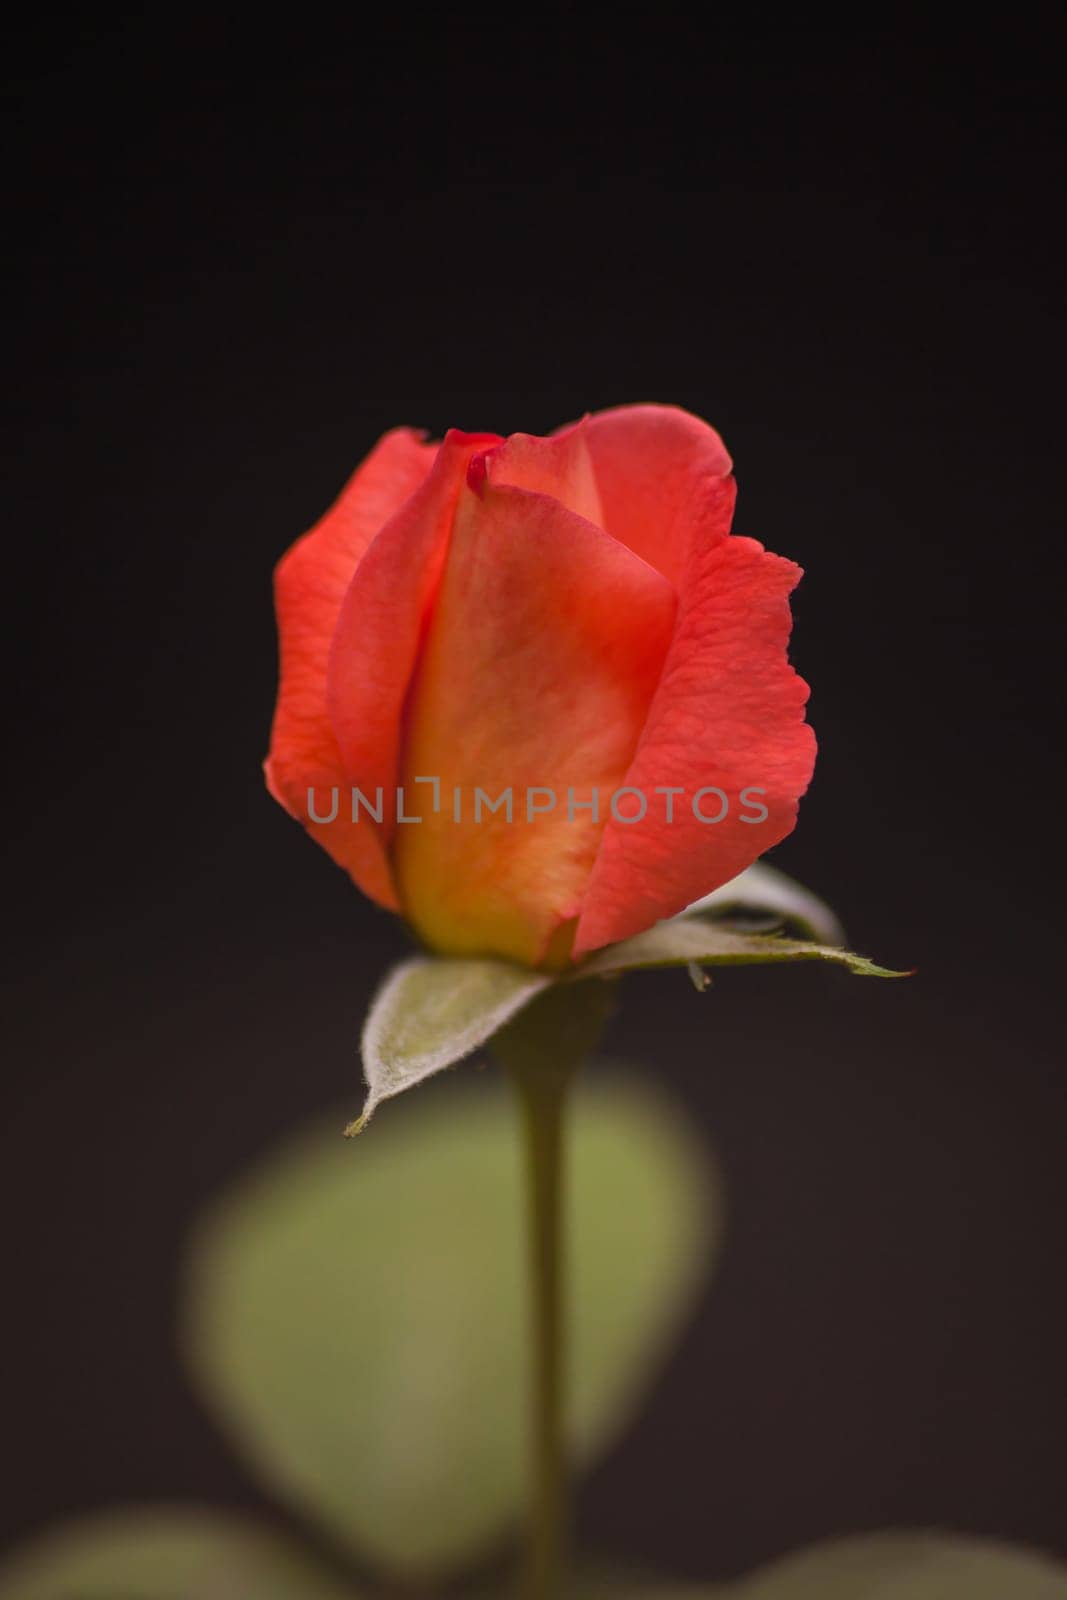 Red Rose isolated on black 15848 by kobus_peche